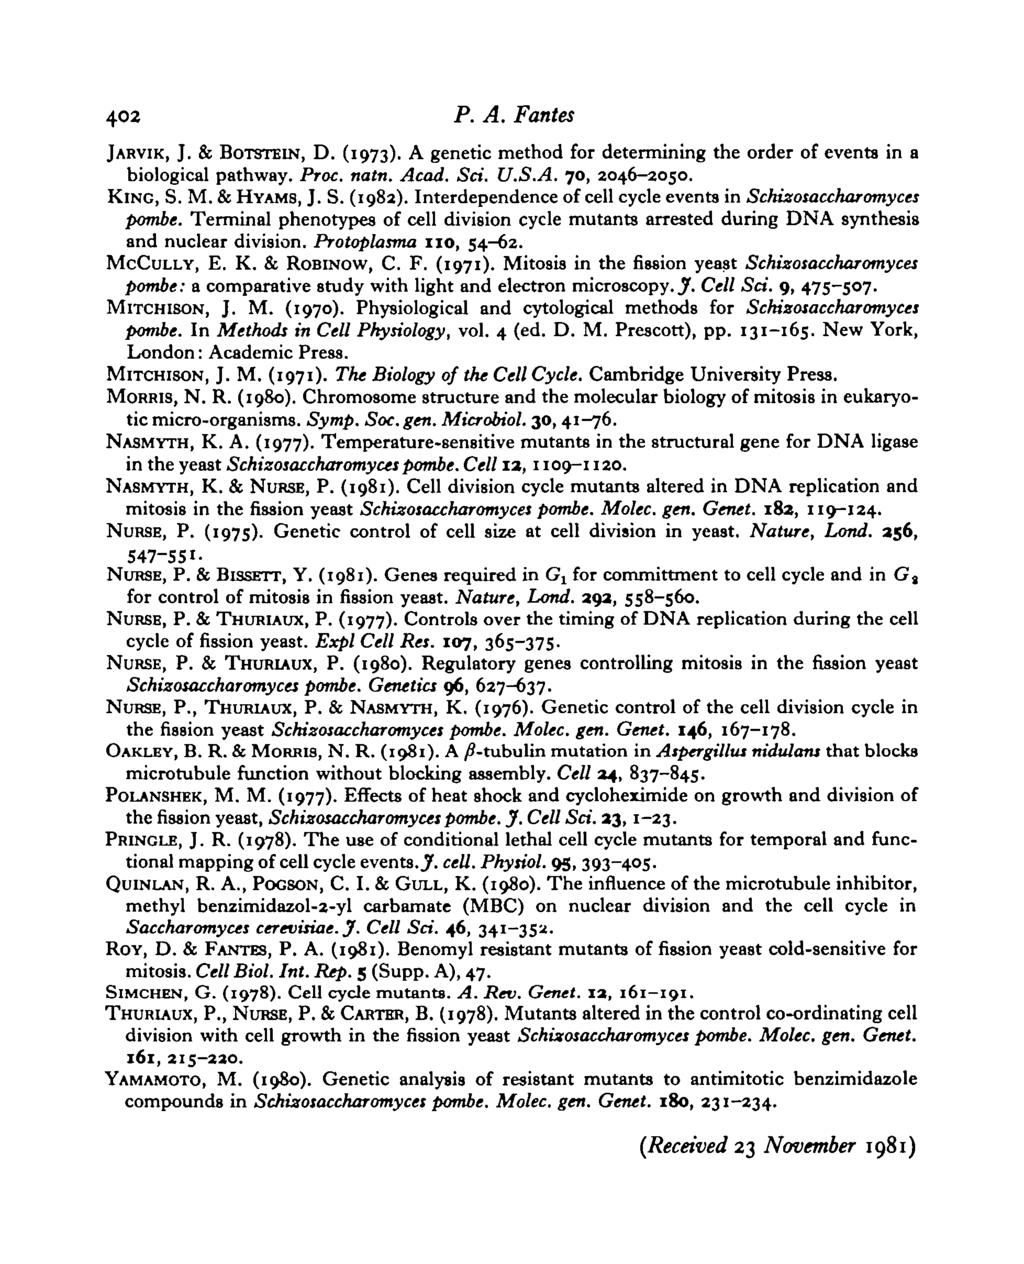 402 P. A. Fantes JARVIK, J. & BOTSTEIN, D. (1973). A genetic method for determining the order of events in a biological pathway. Proc. natn. Acad. Sci. U.S.A. 70, 2046-2050. KING, S. M. & HYAMS, J. S. (1982).